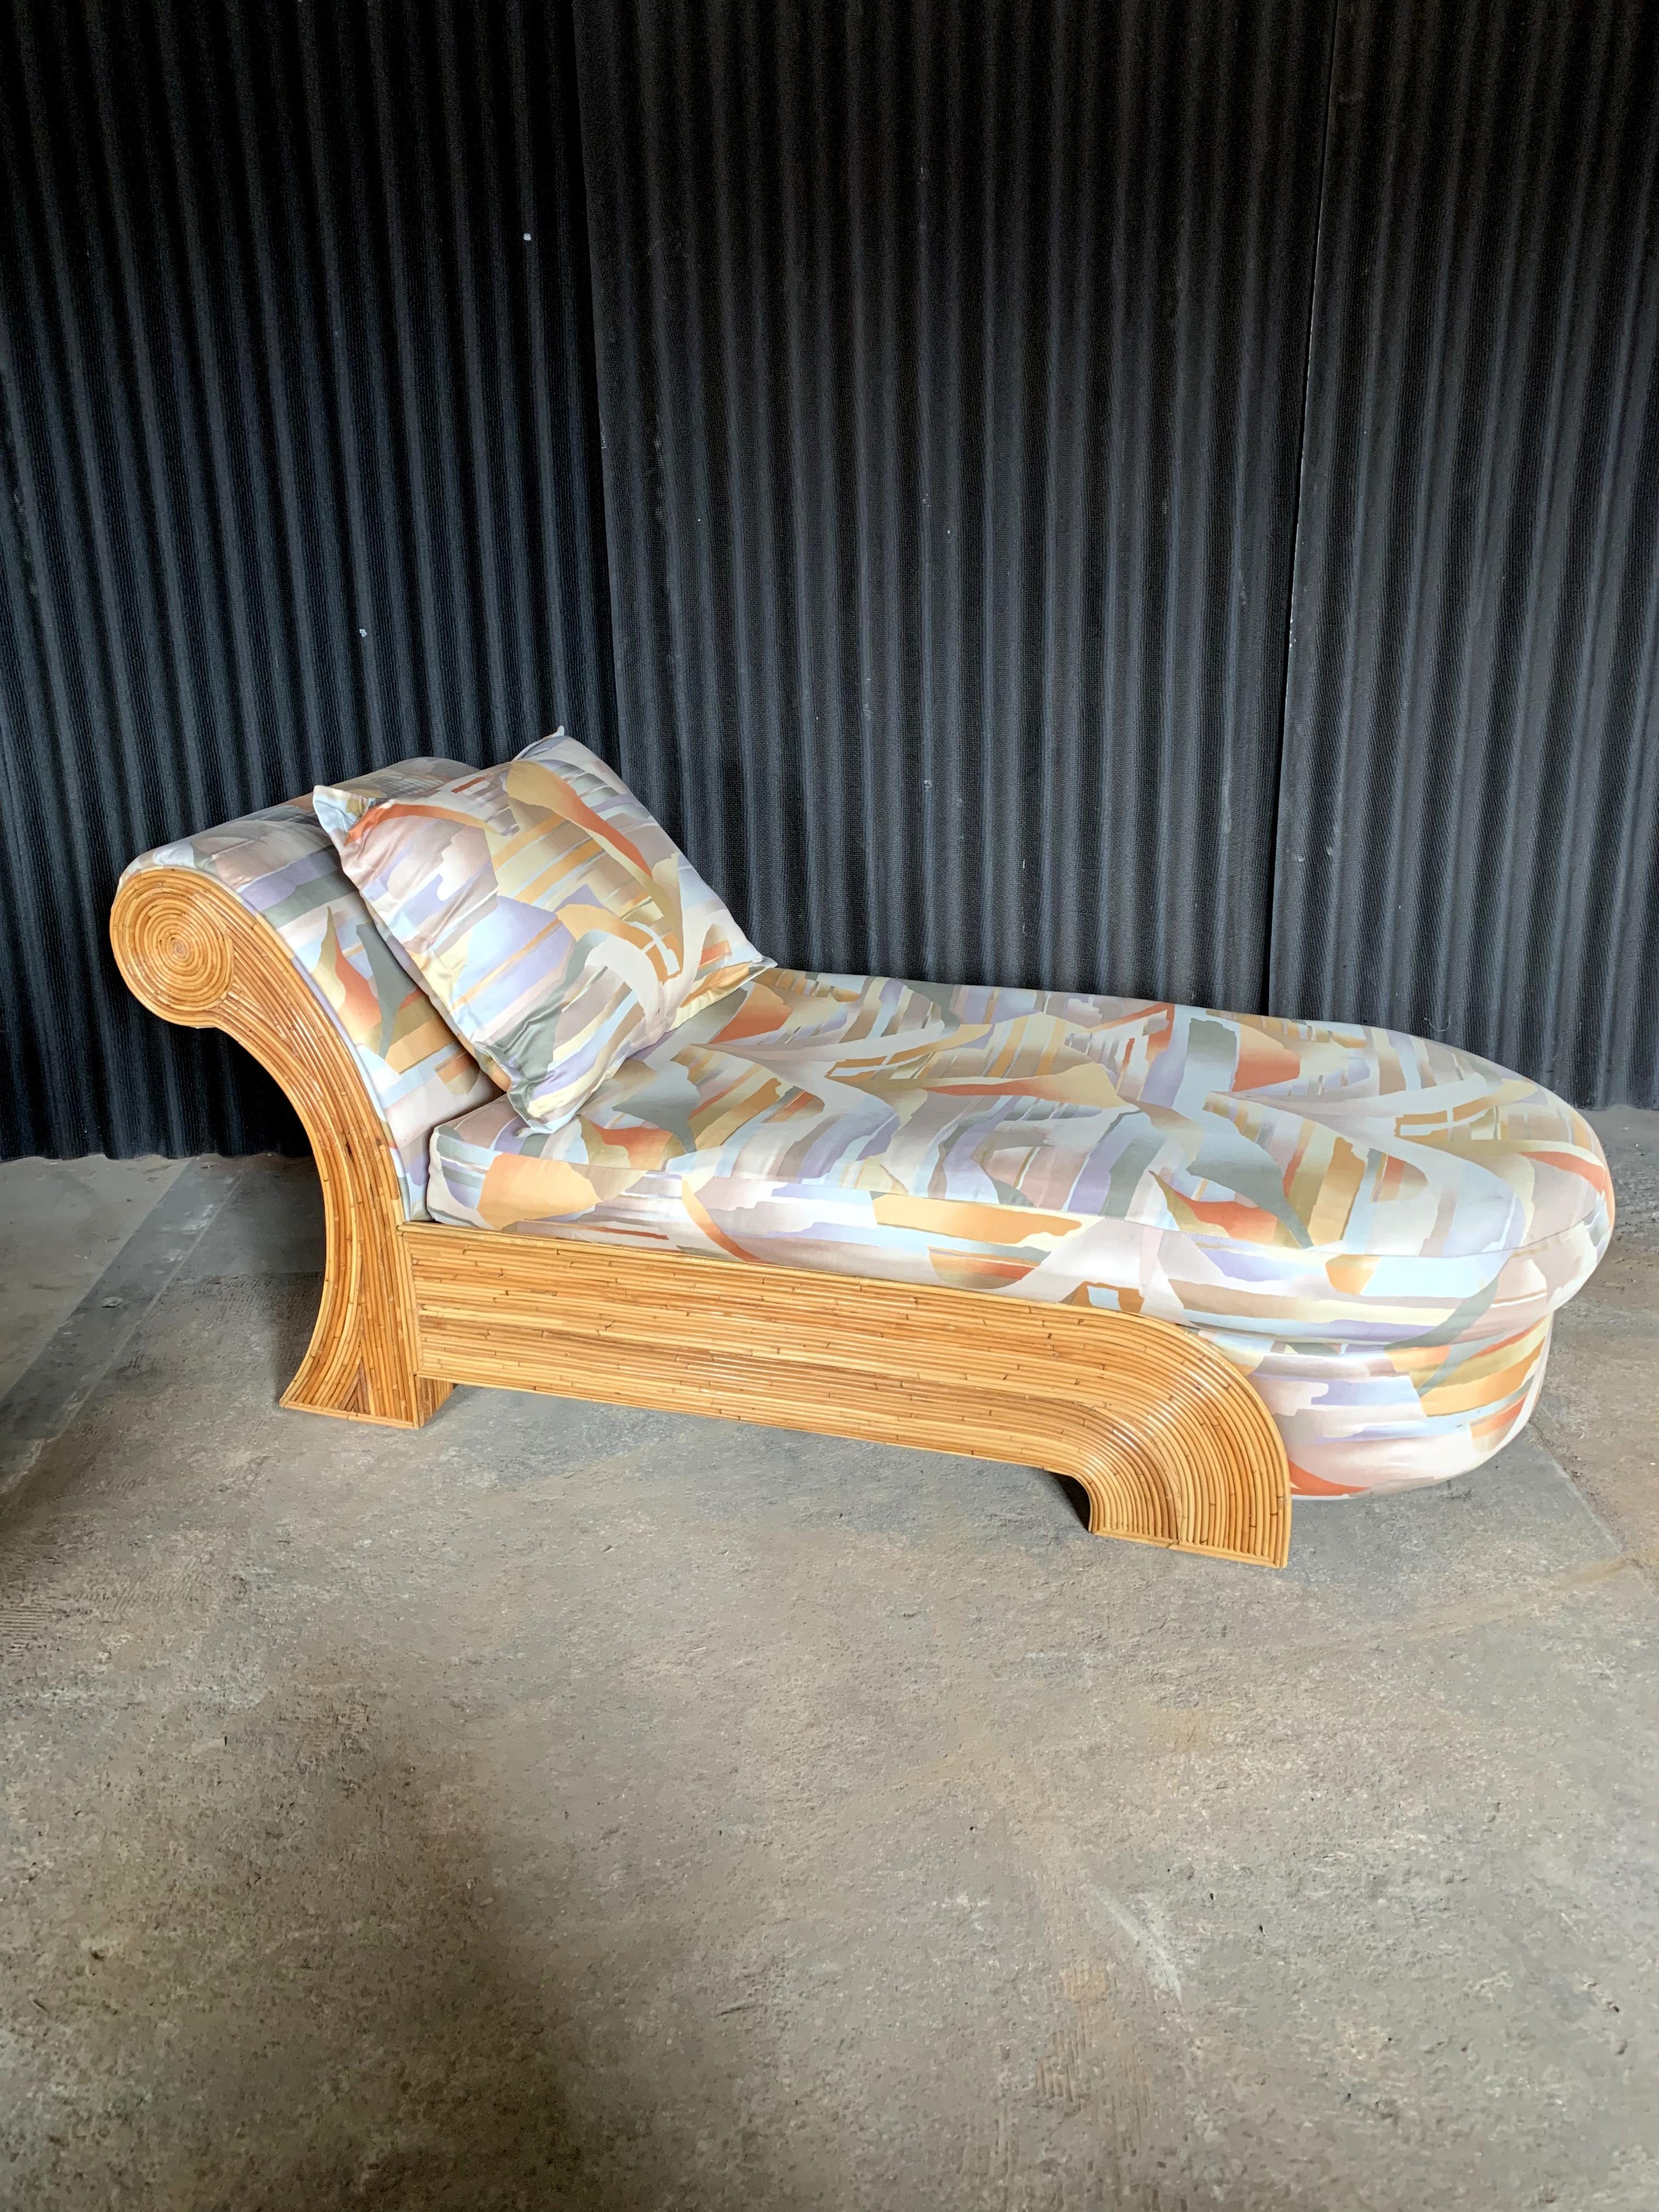 Stunning chaise lounge ready to be loved for decades to come!
Elegant design and a style that is Classic and will be so forever.
Excellent condition with no breaks for damage to the rattan.
Fabric is in excellent condition with no rips or